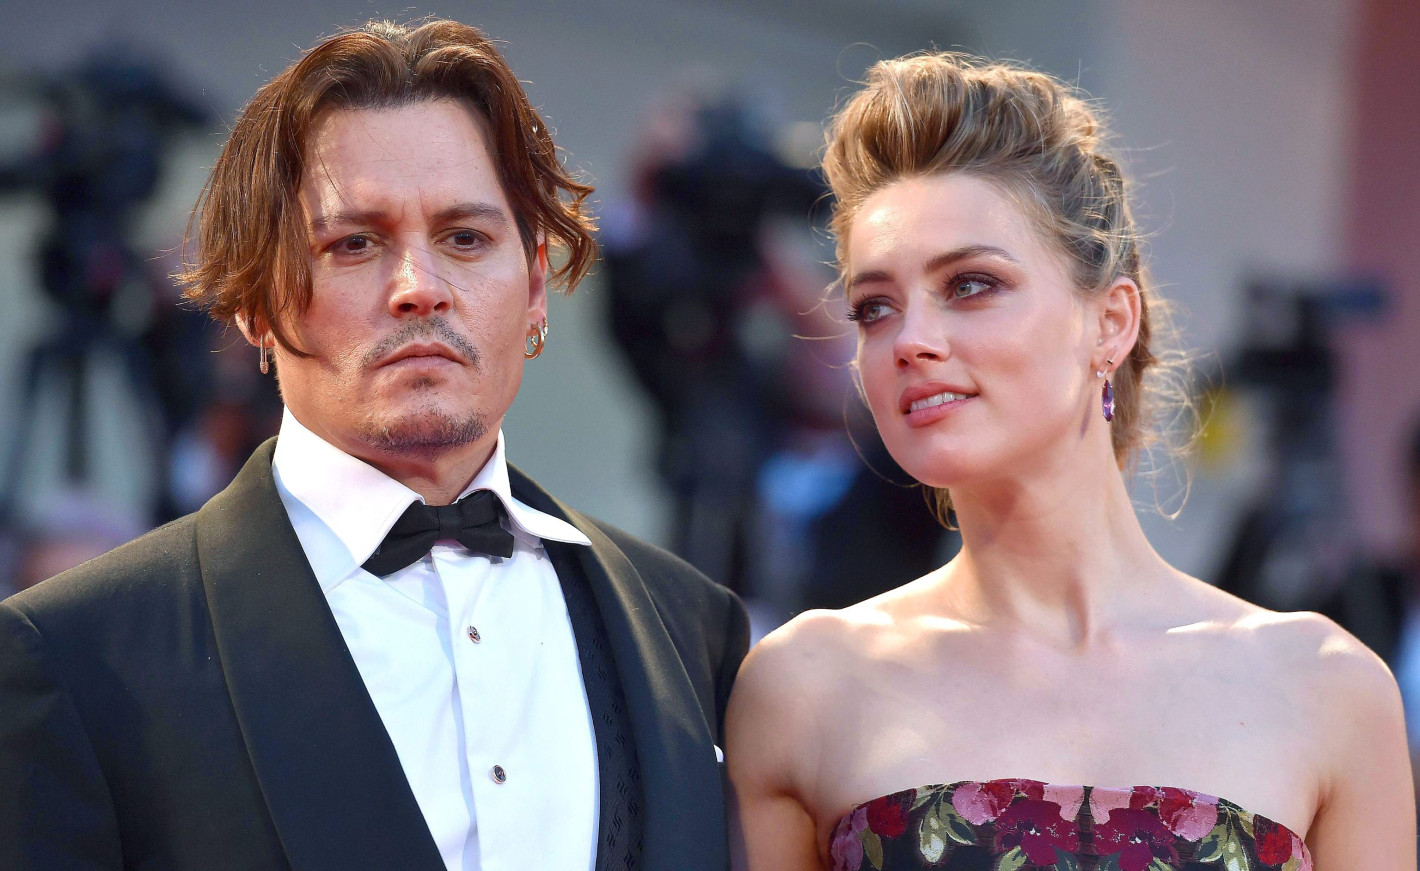 epa04915339 US actress/cast member Amber Heard and her husband Johnny Depp (L) arrive for the premiere of 'The Danish Girl' during the 72nd annual Venice International Film Festival, in Venice, Italy, 05 September 2015. The movie is presented in official competition 'Venezia 72' at the festival running from 02 September to 12 September. EPA/ETTORE FERRARI